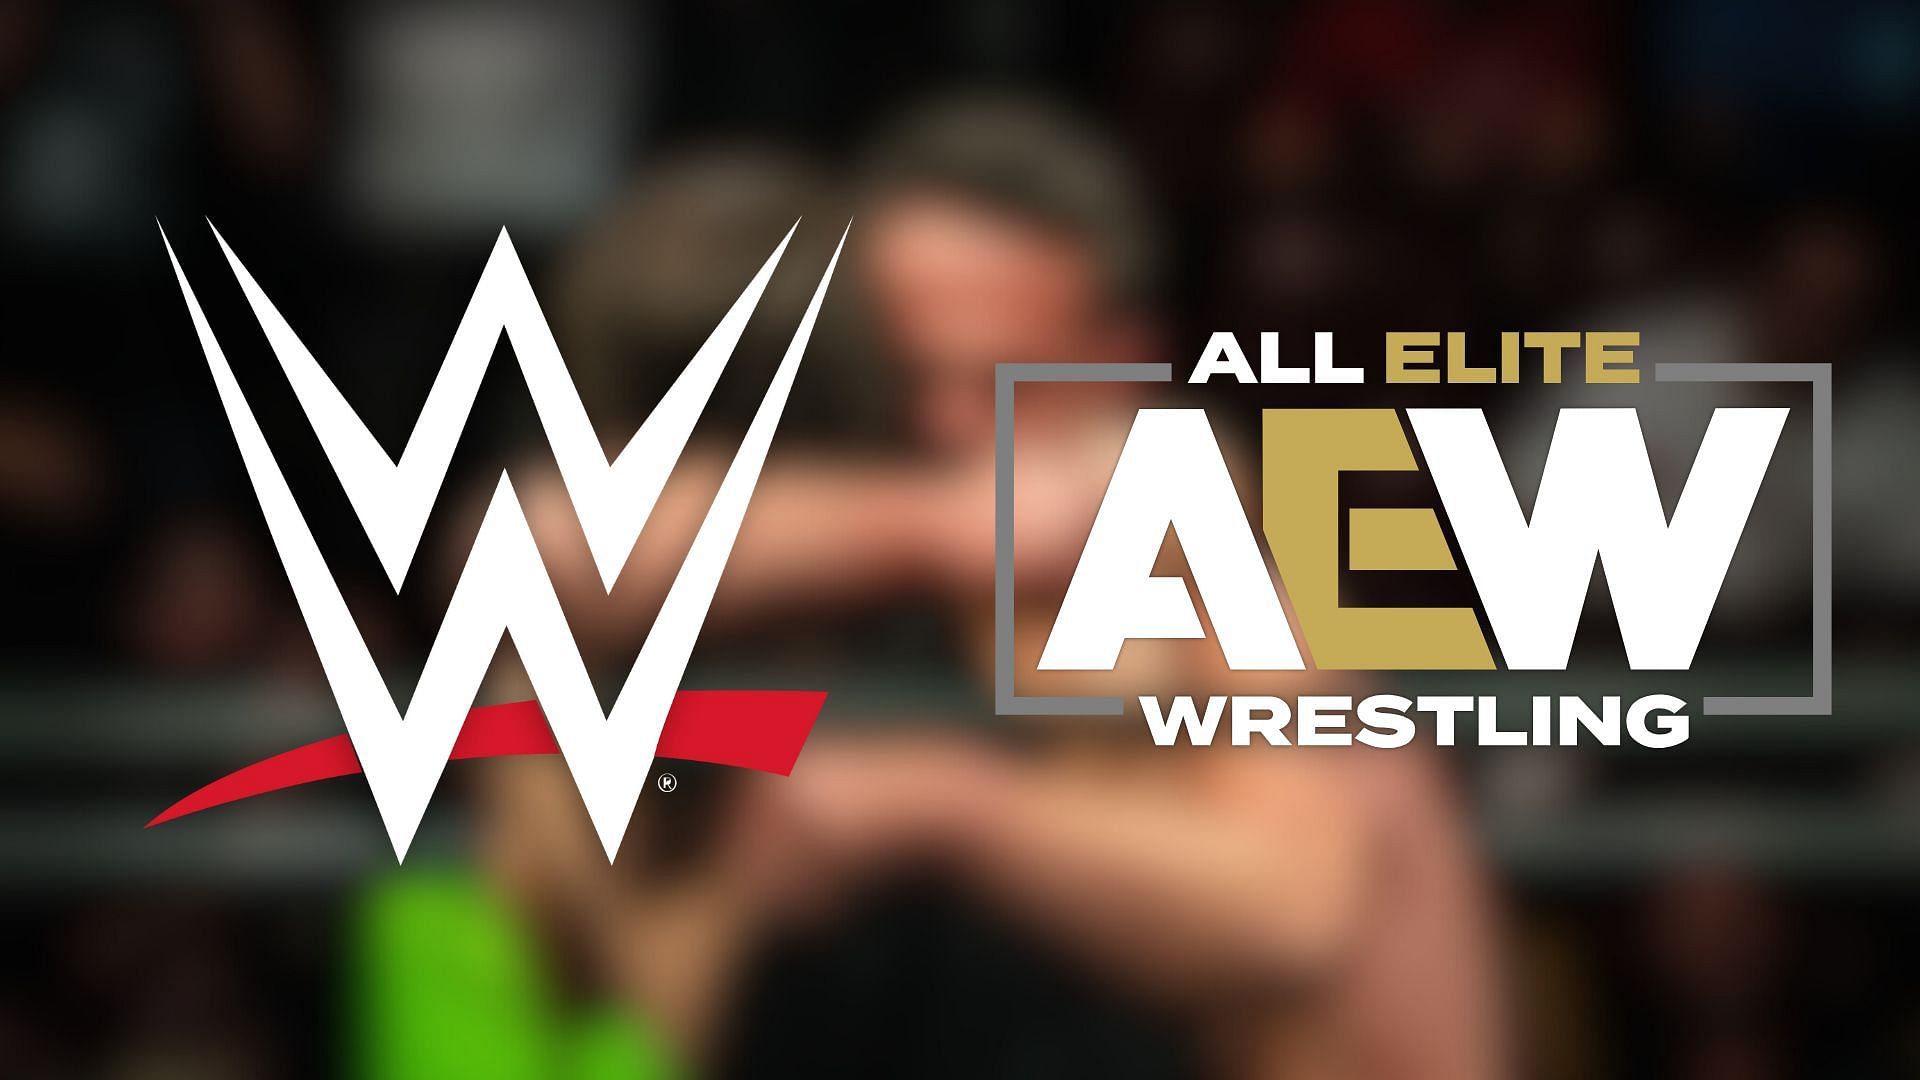 A former WWE Superstar has been in talks with AEW for a while